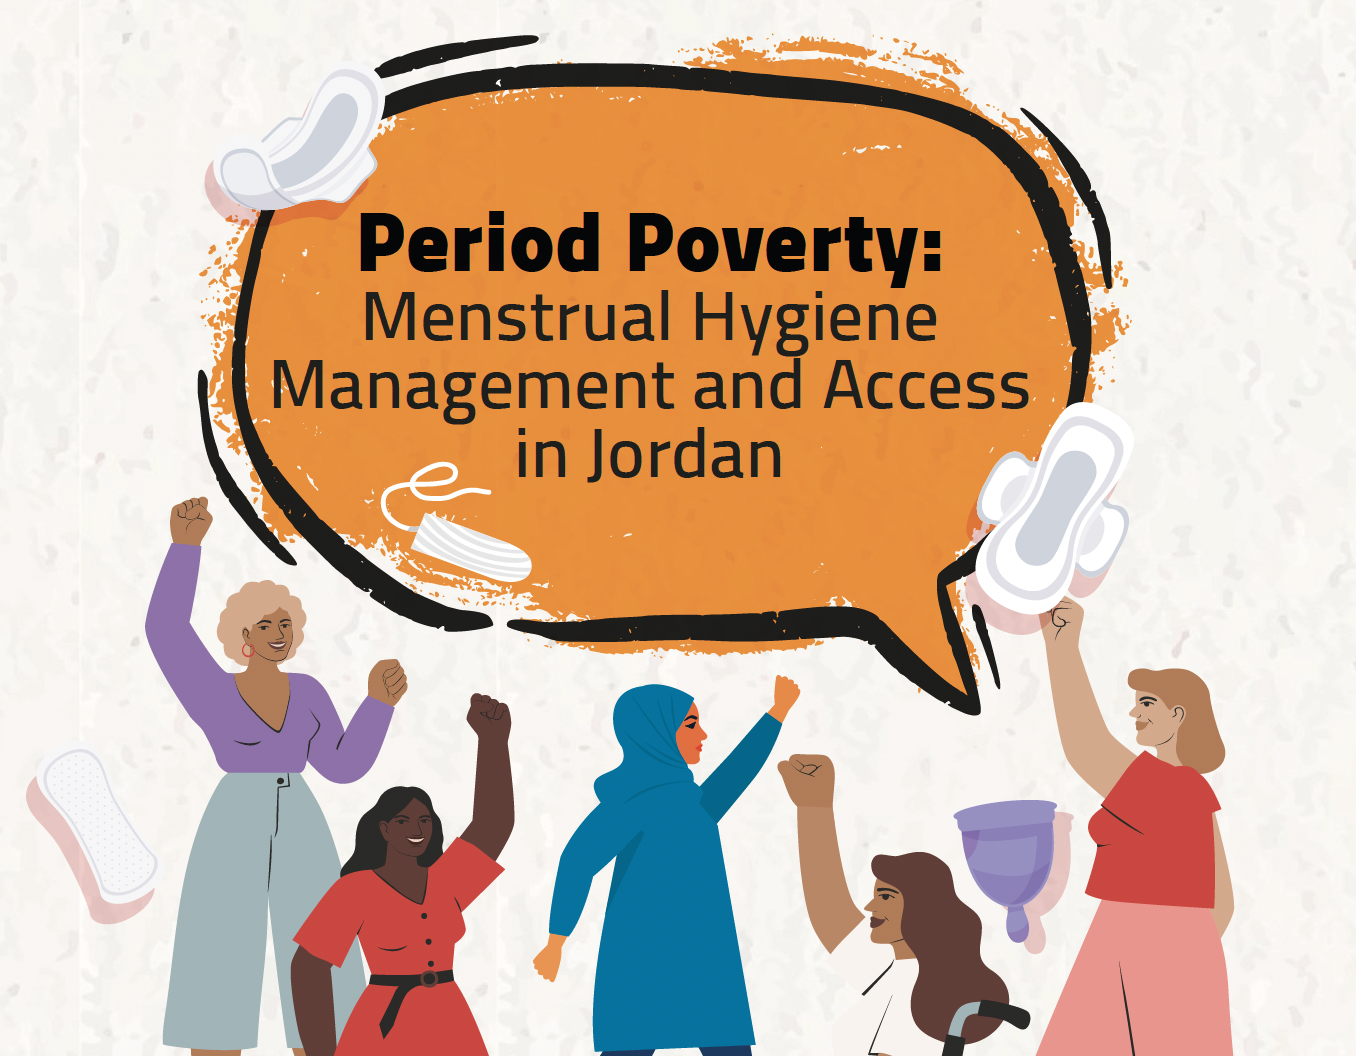 Period Poverty: Menstrual Hygiene Management and Access in Jordan - Takatoat